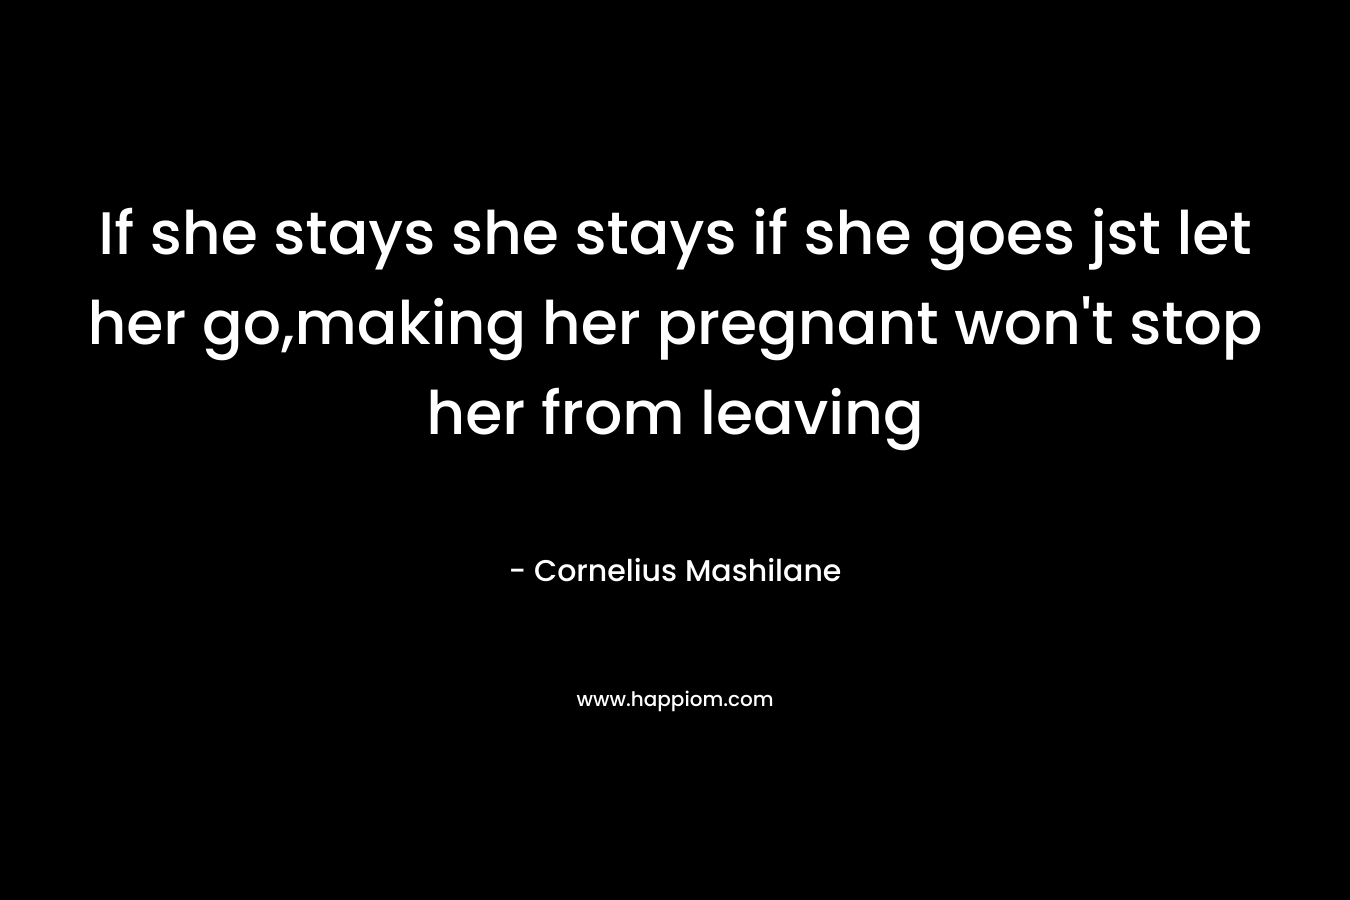 If she stays she stays if she goes jst let her go,making her pregnant won't stop her from leaving